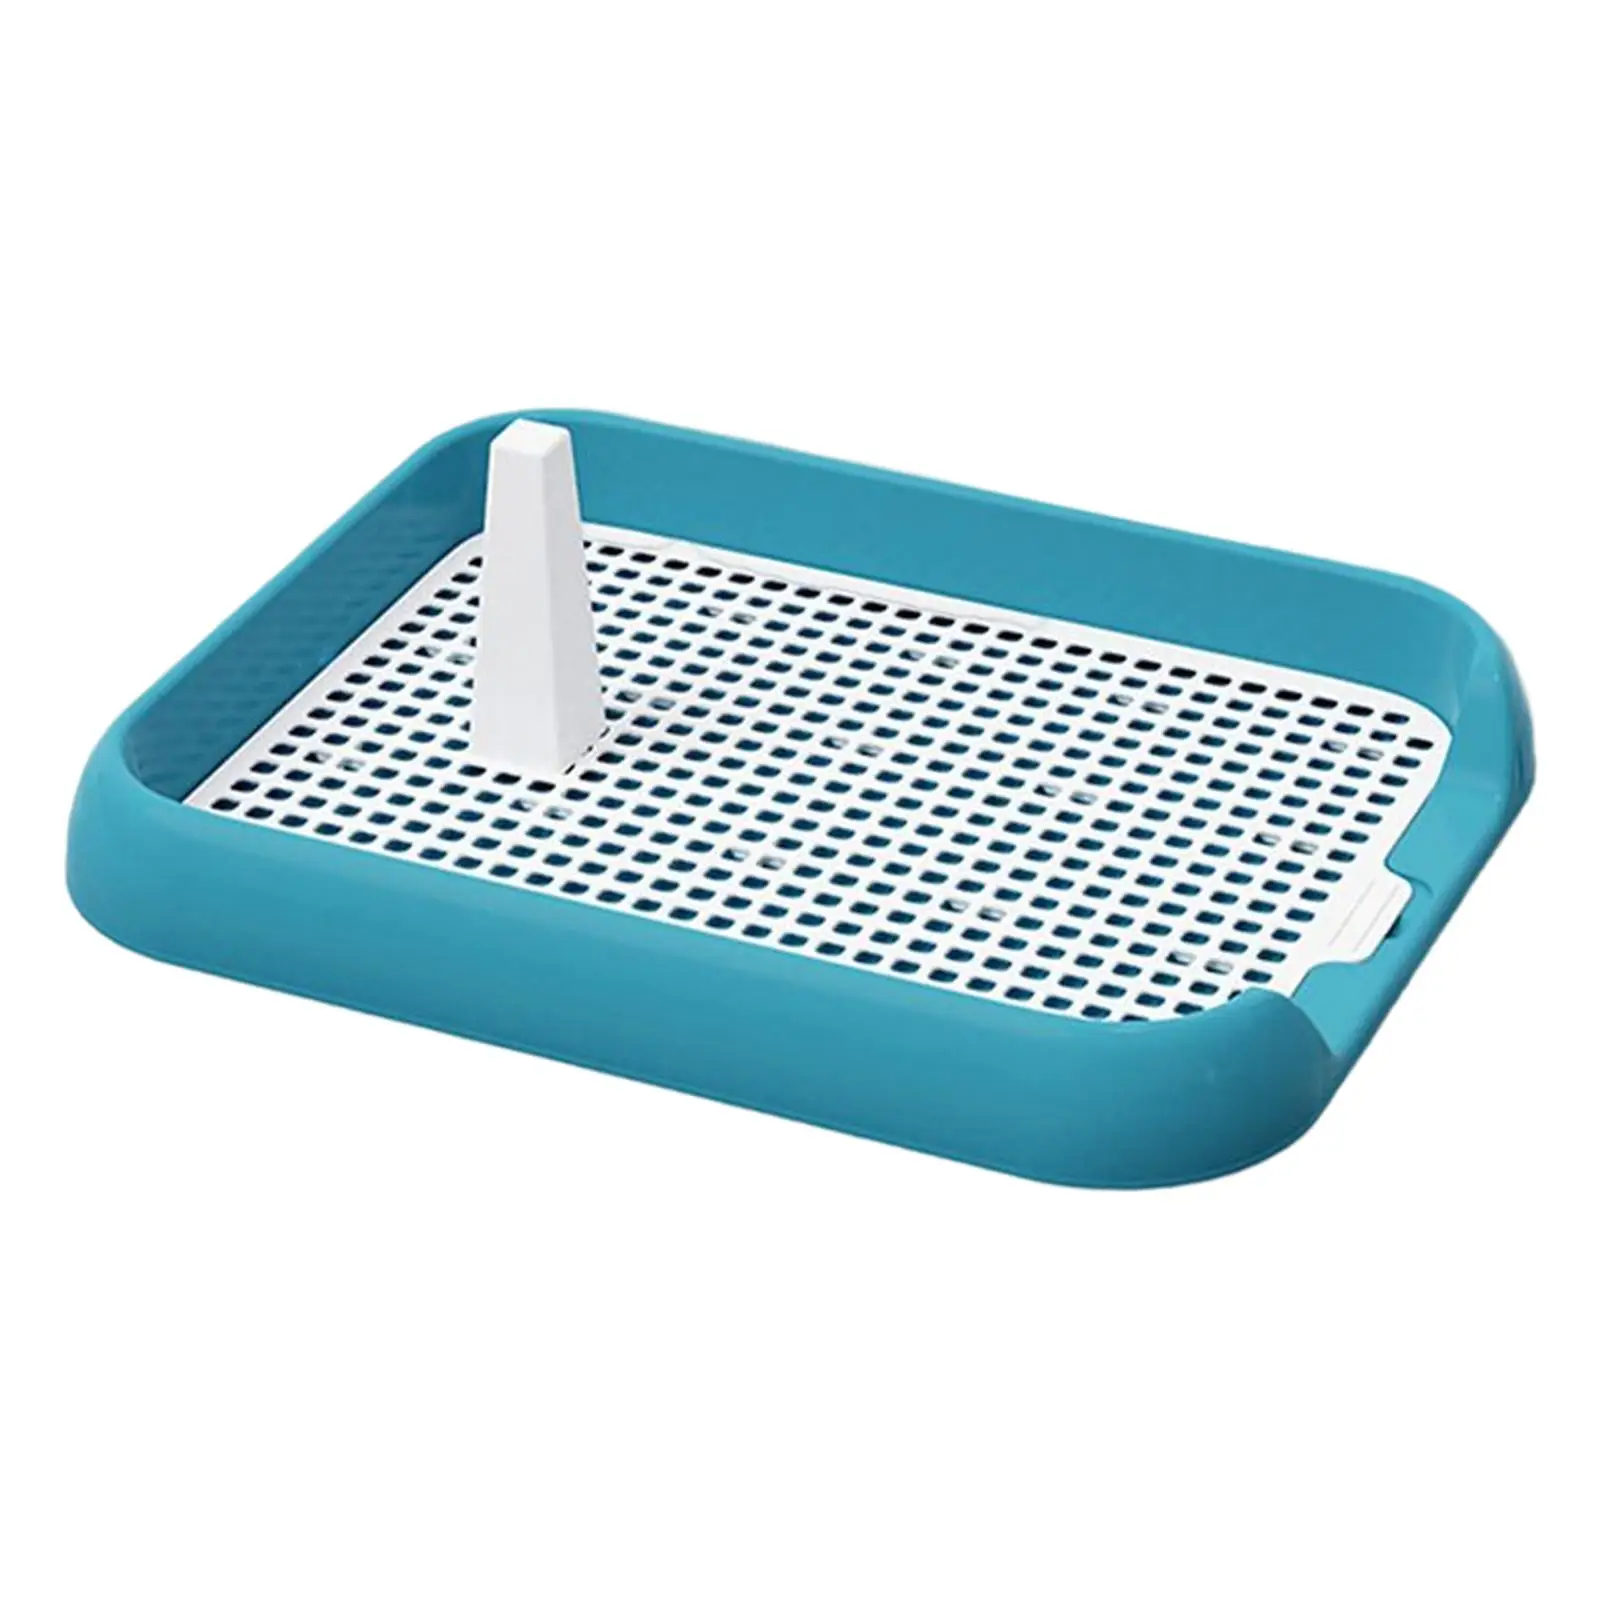 Pet Training Toilet with Tray Portable Cat Litter Box Small Puppy Dog Toilet Small Dog Training Pads Pet Products for Bathroom